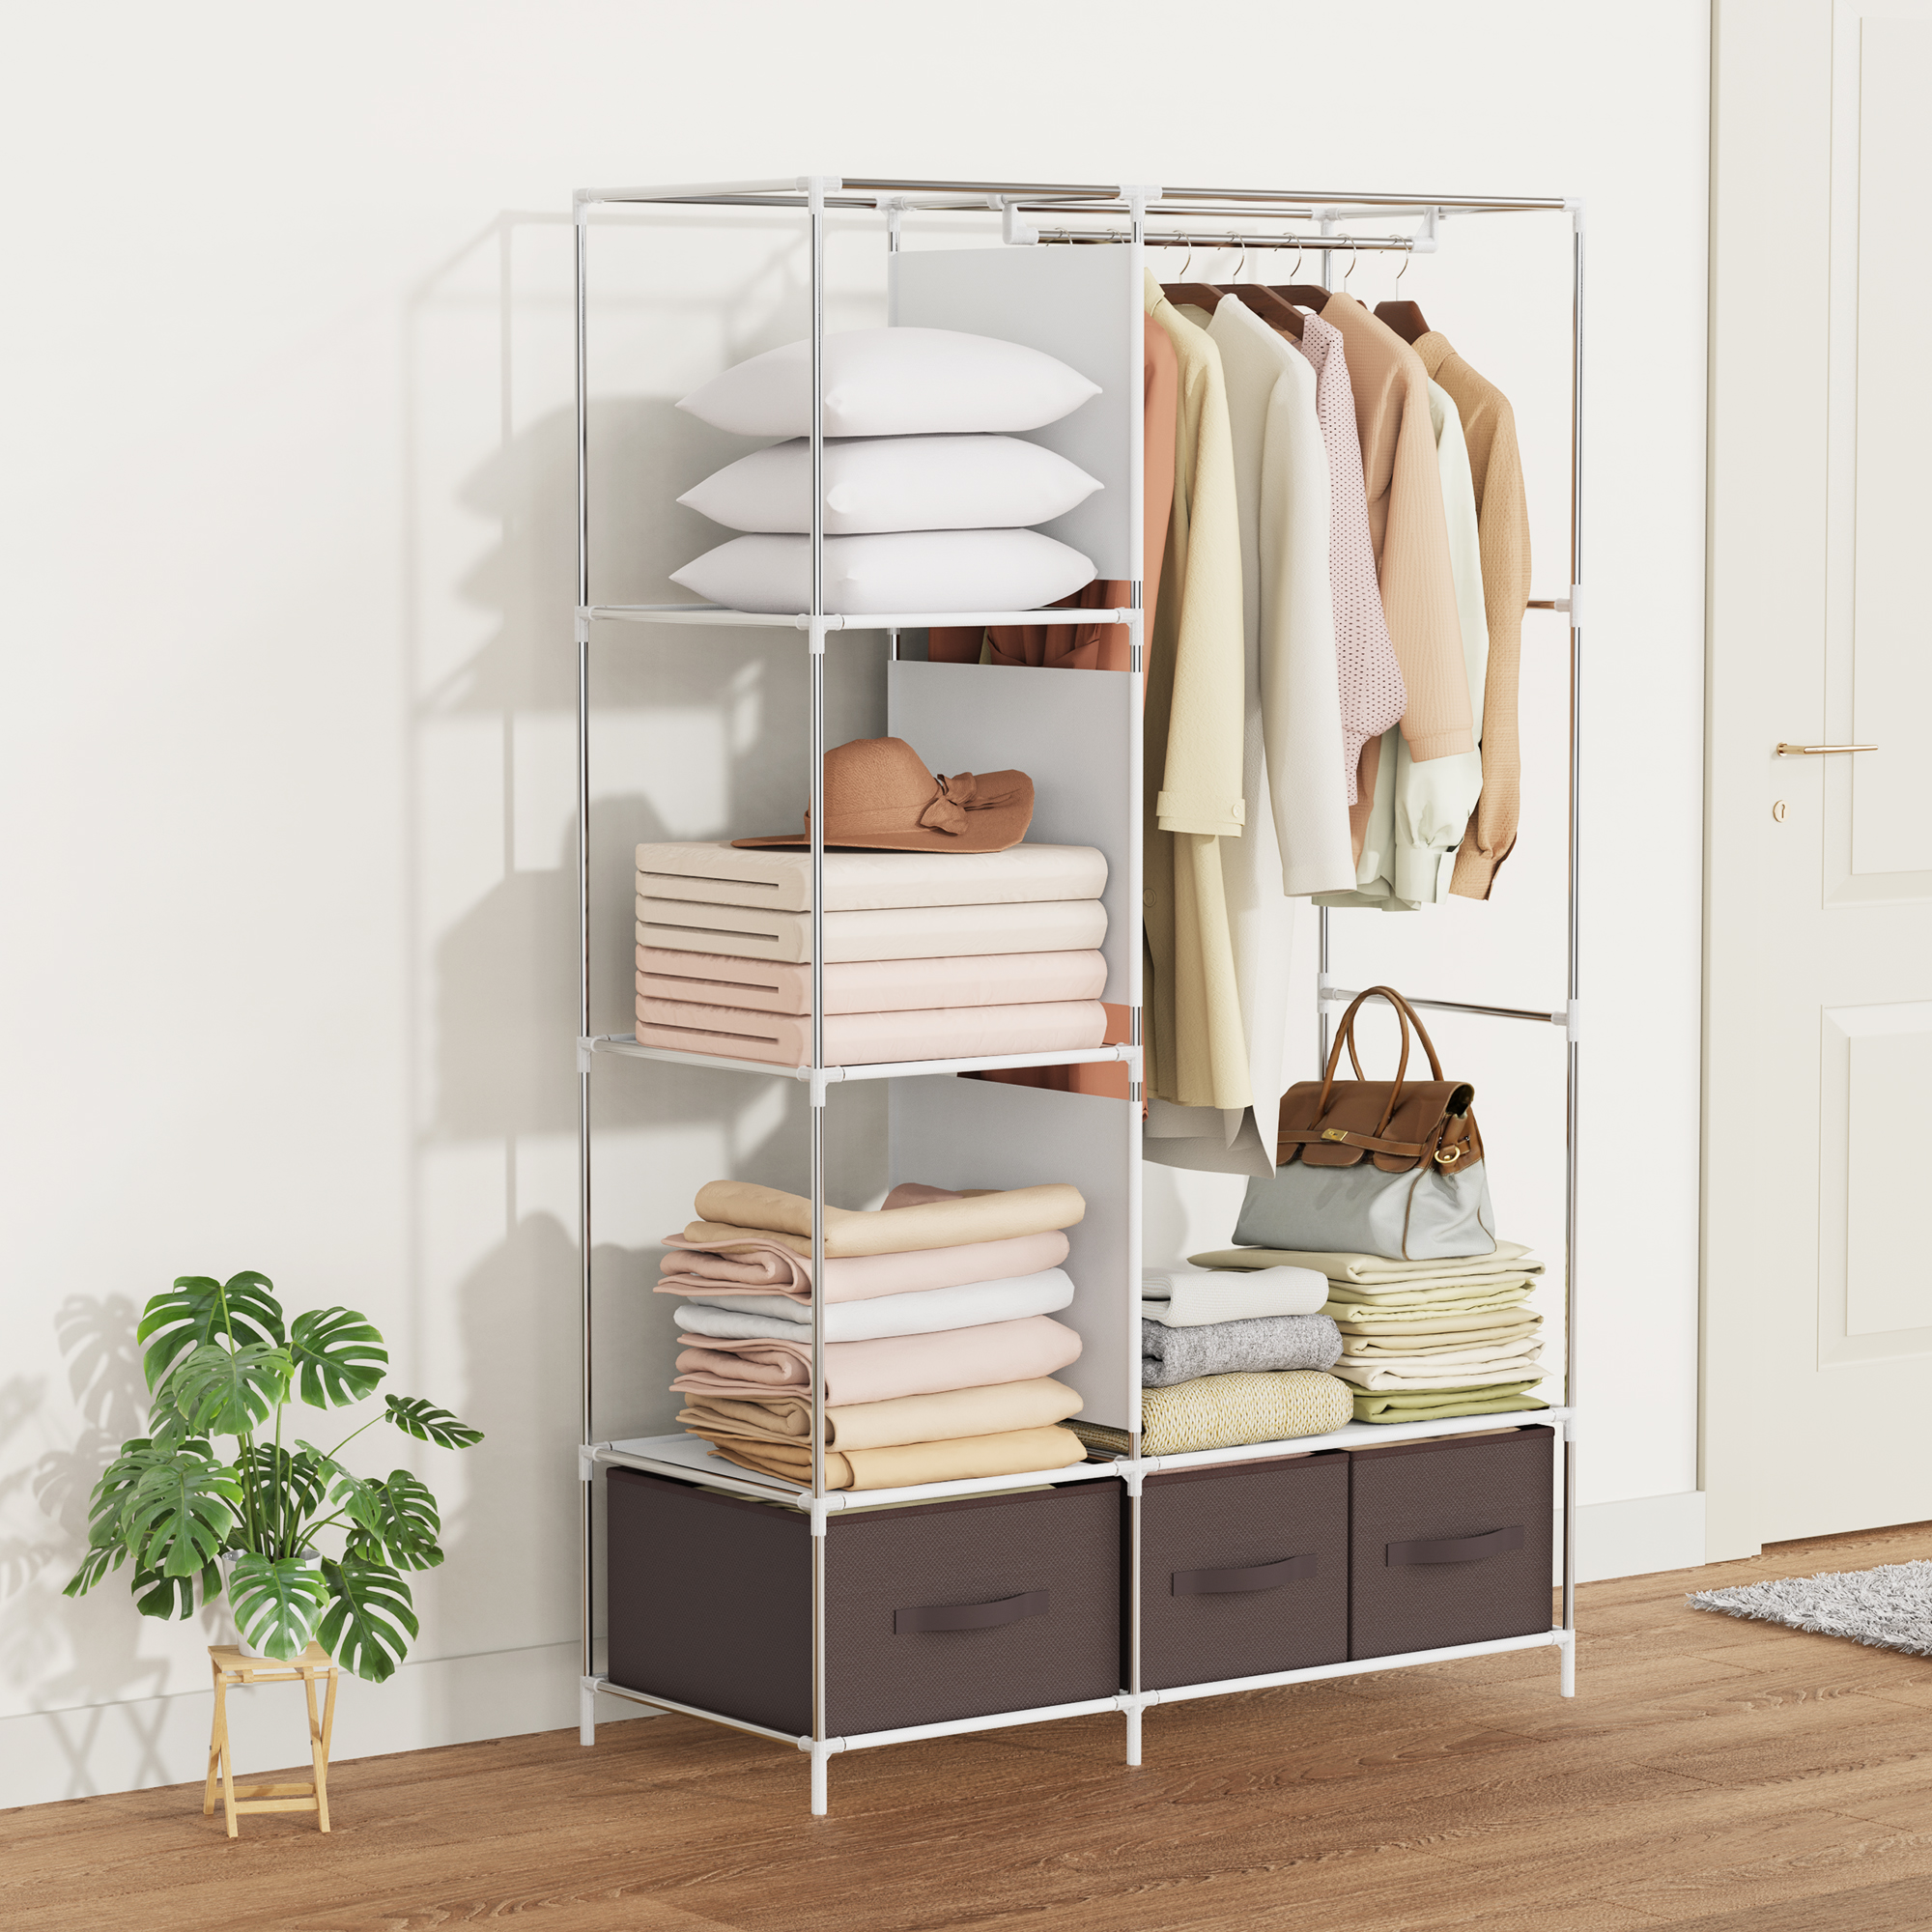 Riousery Portable Closets Wardrobe with Three Storage Boxes, Stable and Easy Assembly Clothes Rack for Hanging Clothes - image 5 of 7